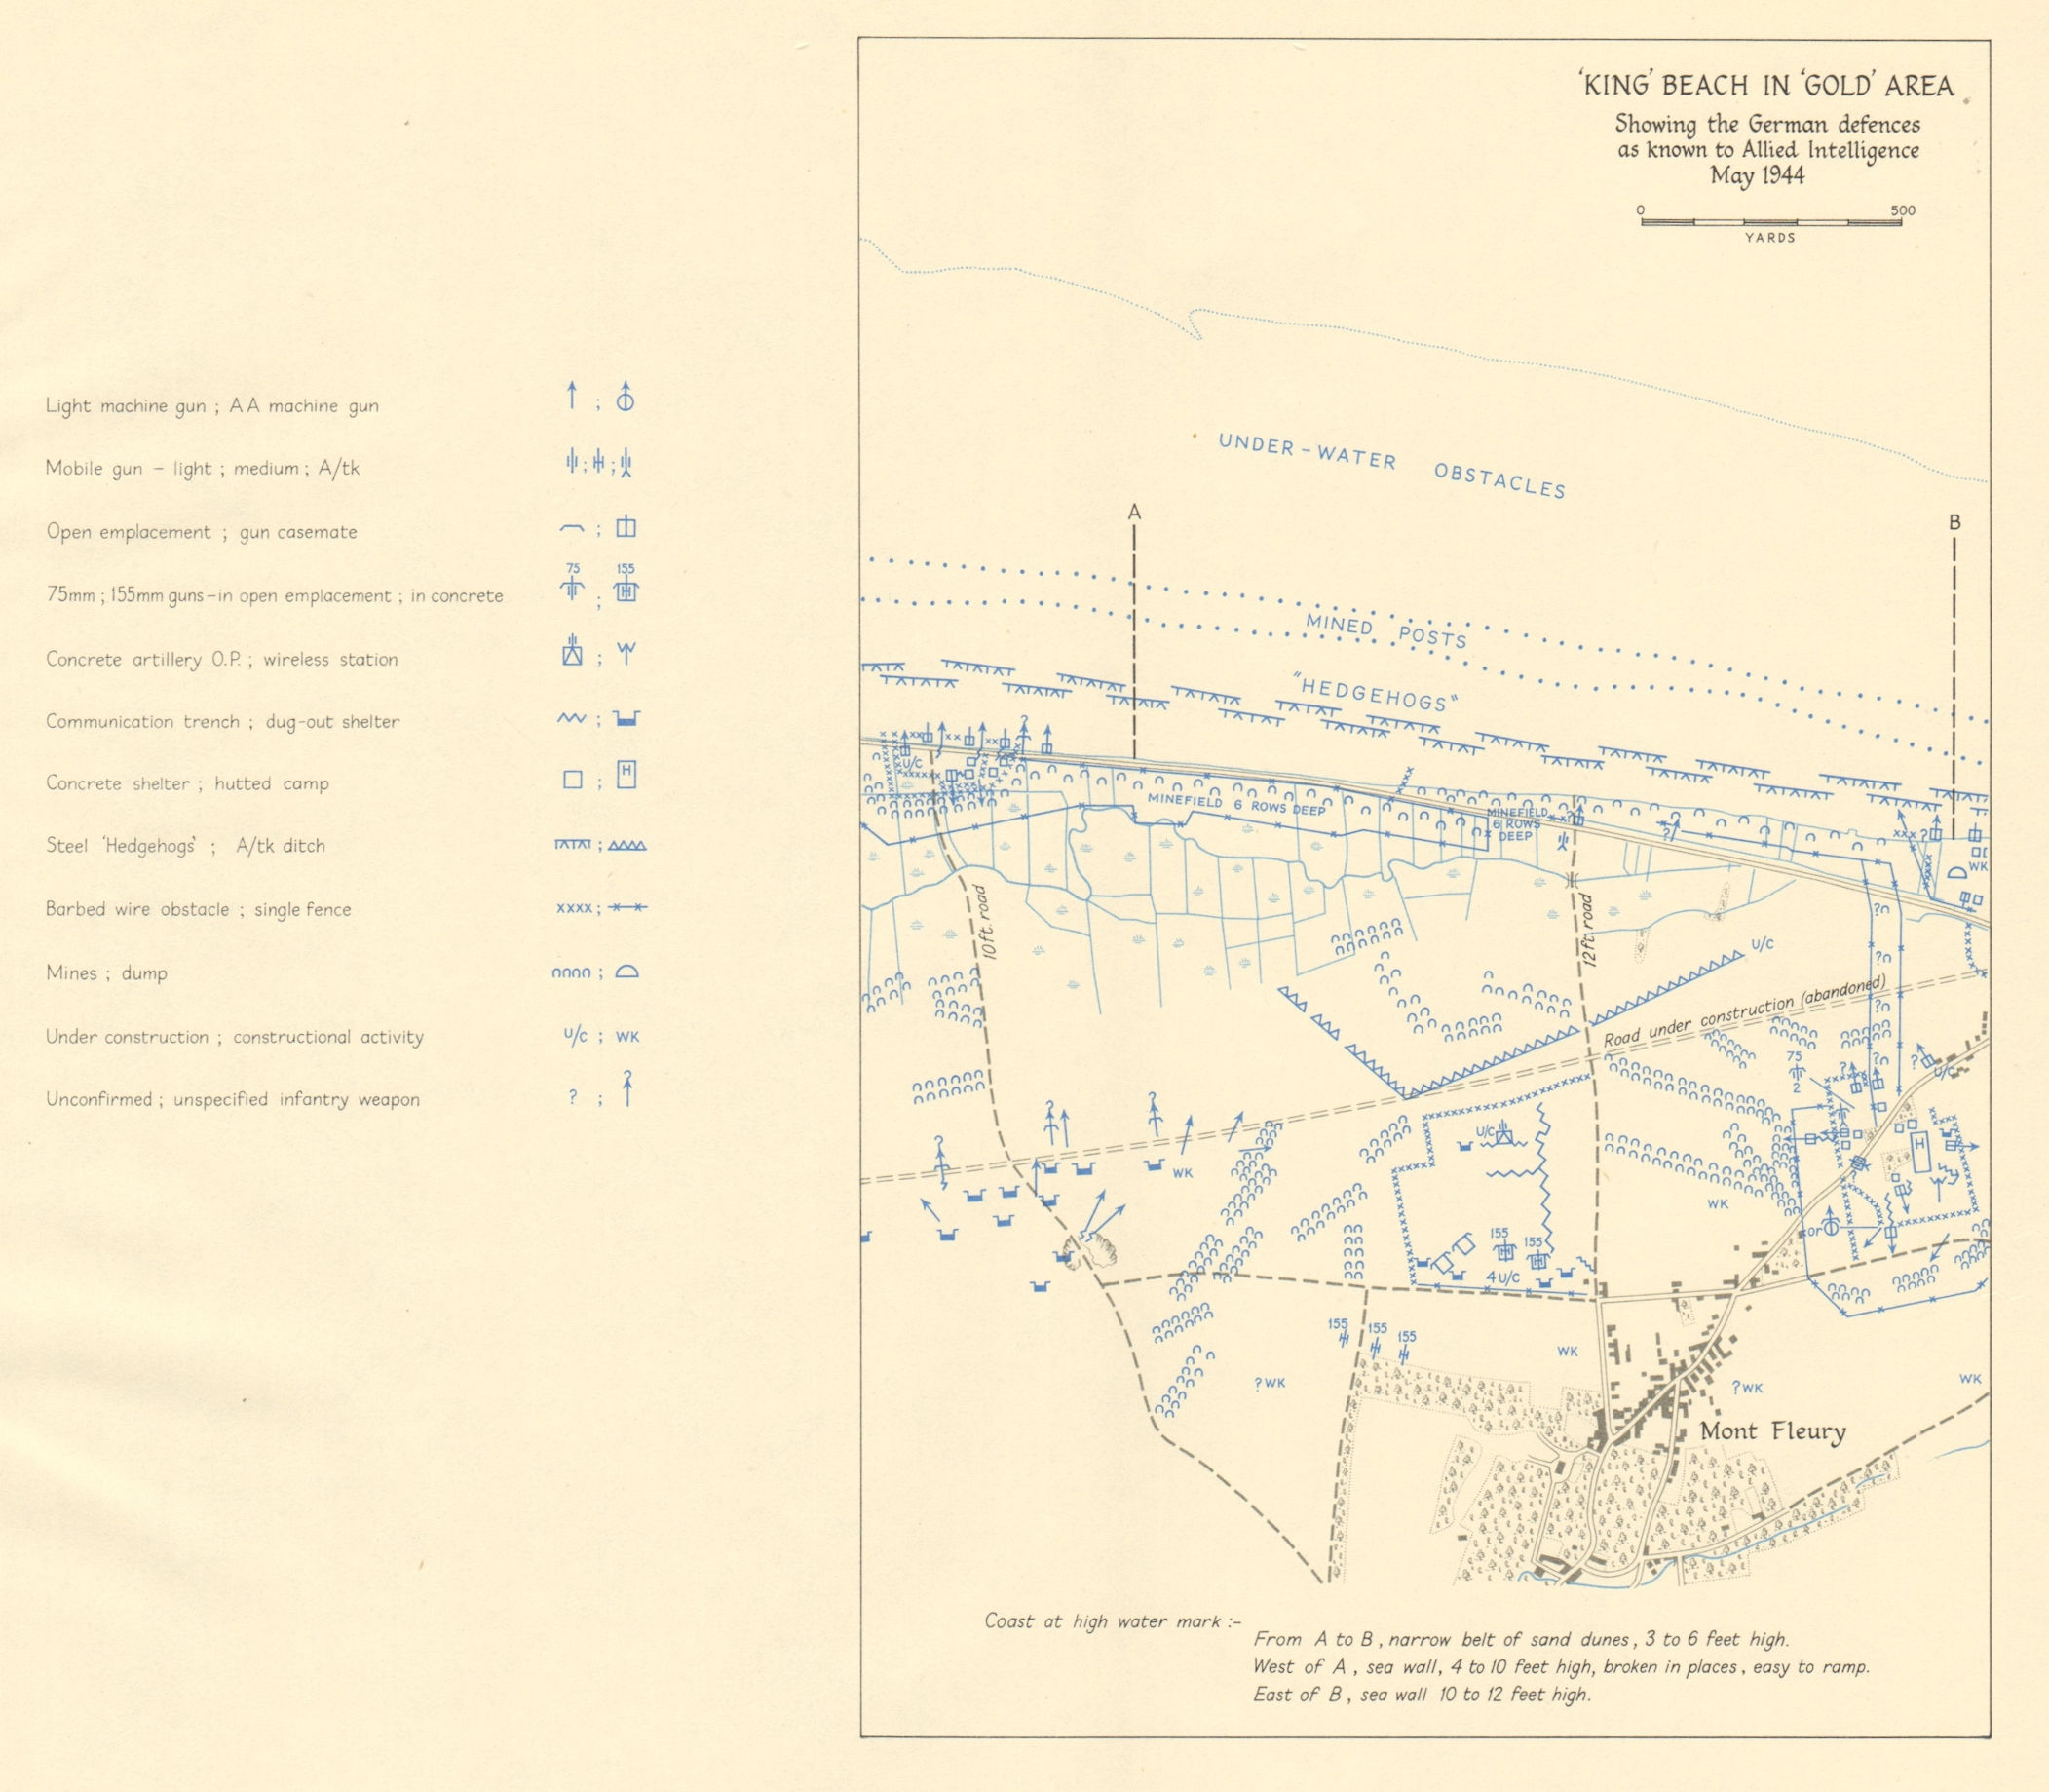 D-Day. King Beach, Gold Area. German defences, May 1944. Mont Fleury 1962 map